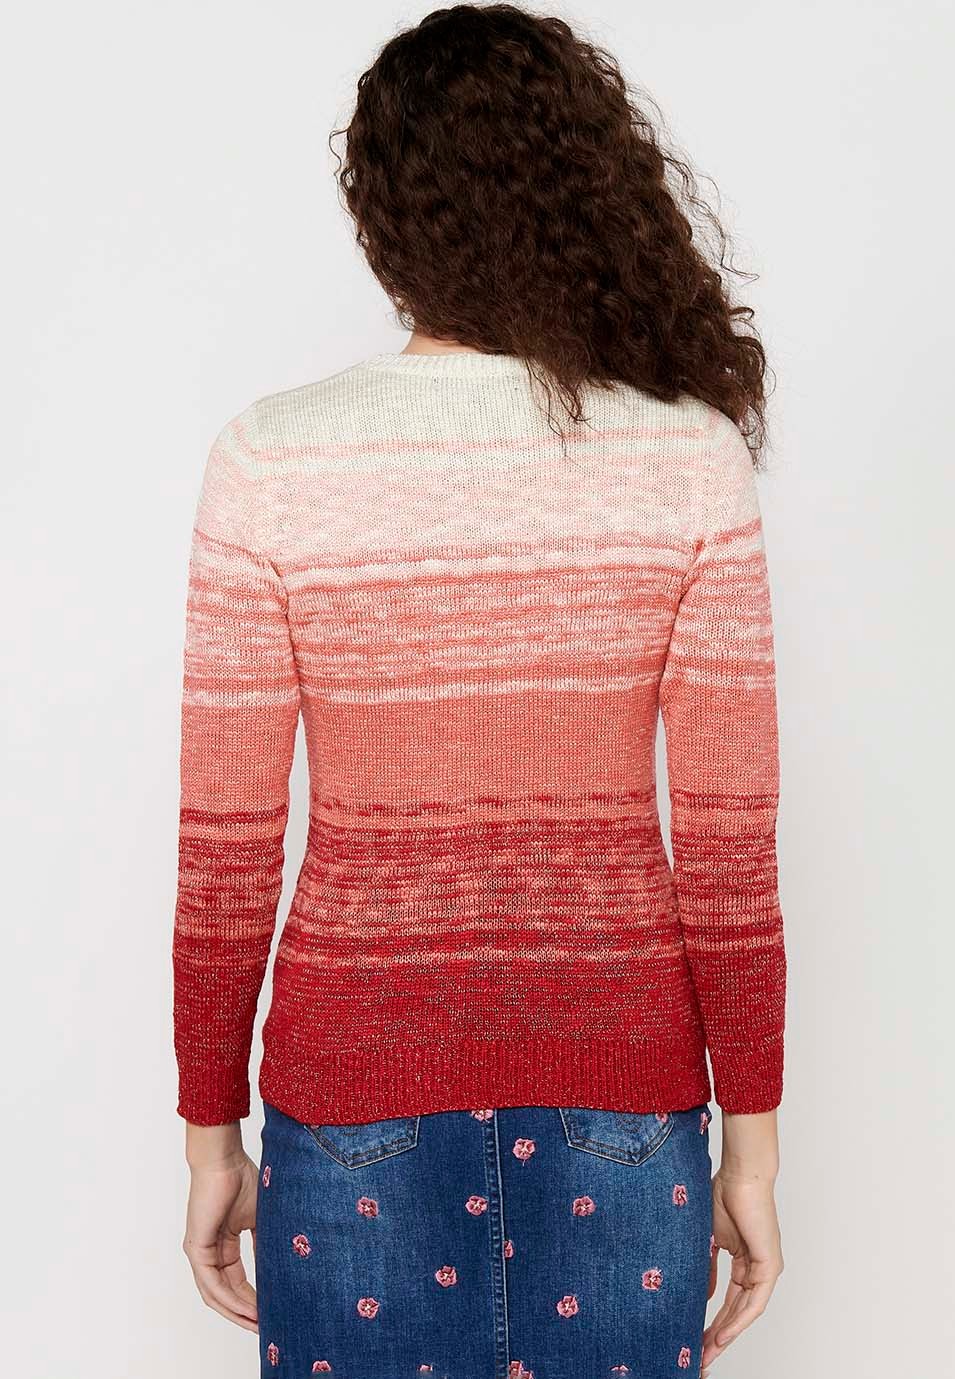 Round neck long sleeve sweater. Gradient Tricot in two colors of Coral Color for Women 8